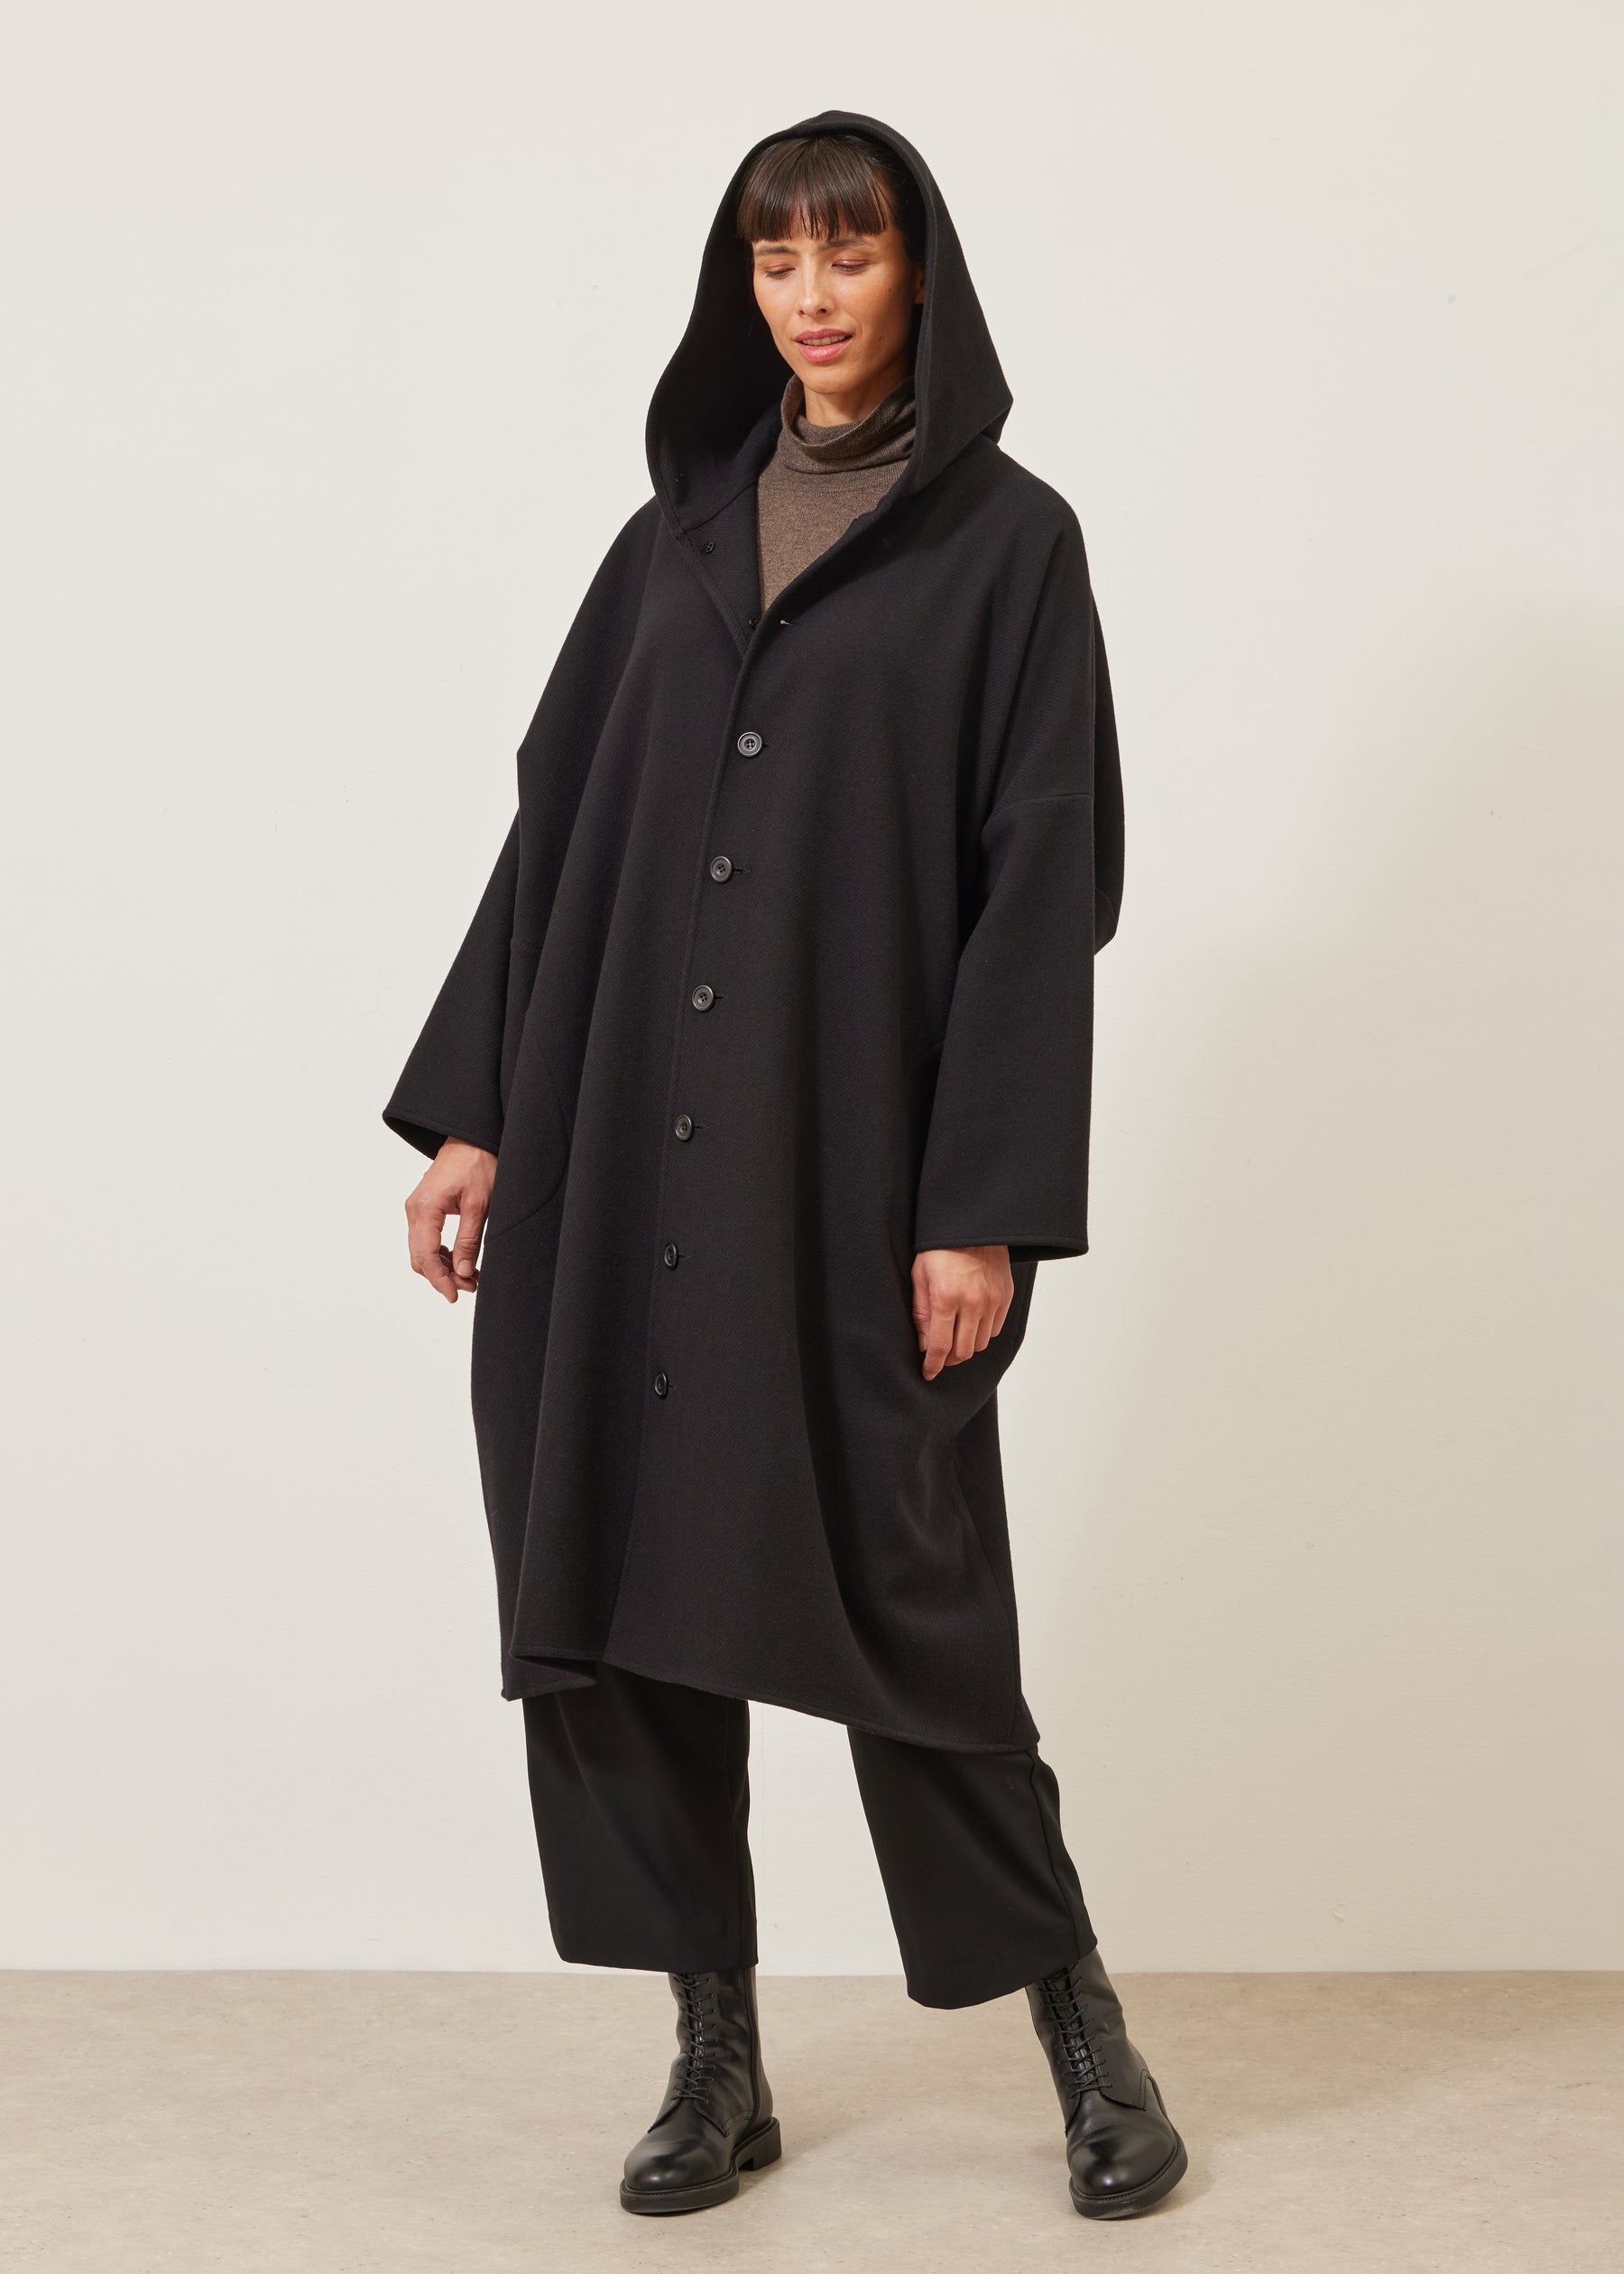 wide hooded buttoned coat - 3/4 length